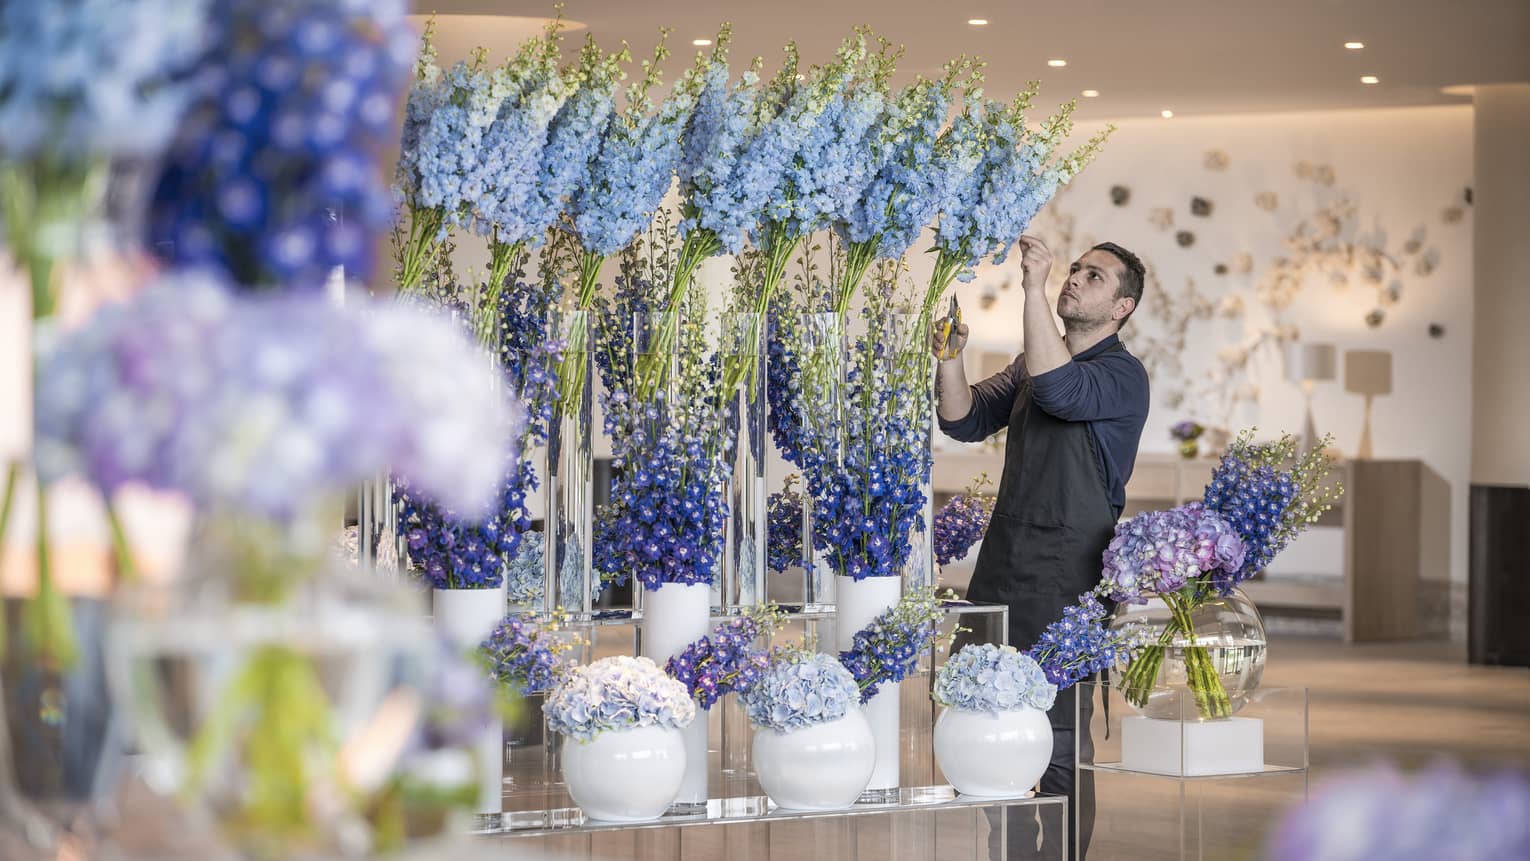 Florist tends to tall blue floral arrangements in glass vases in studio